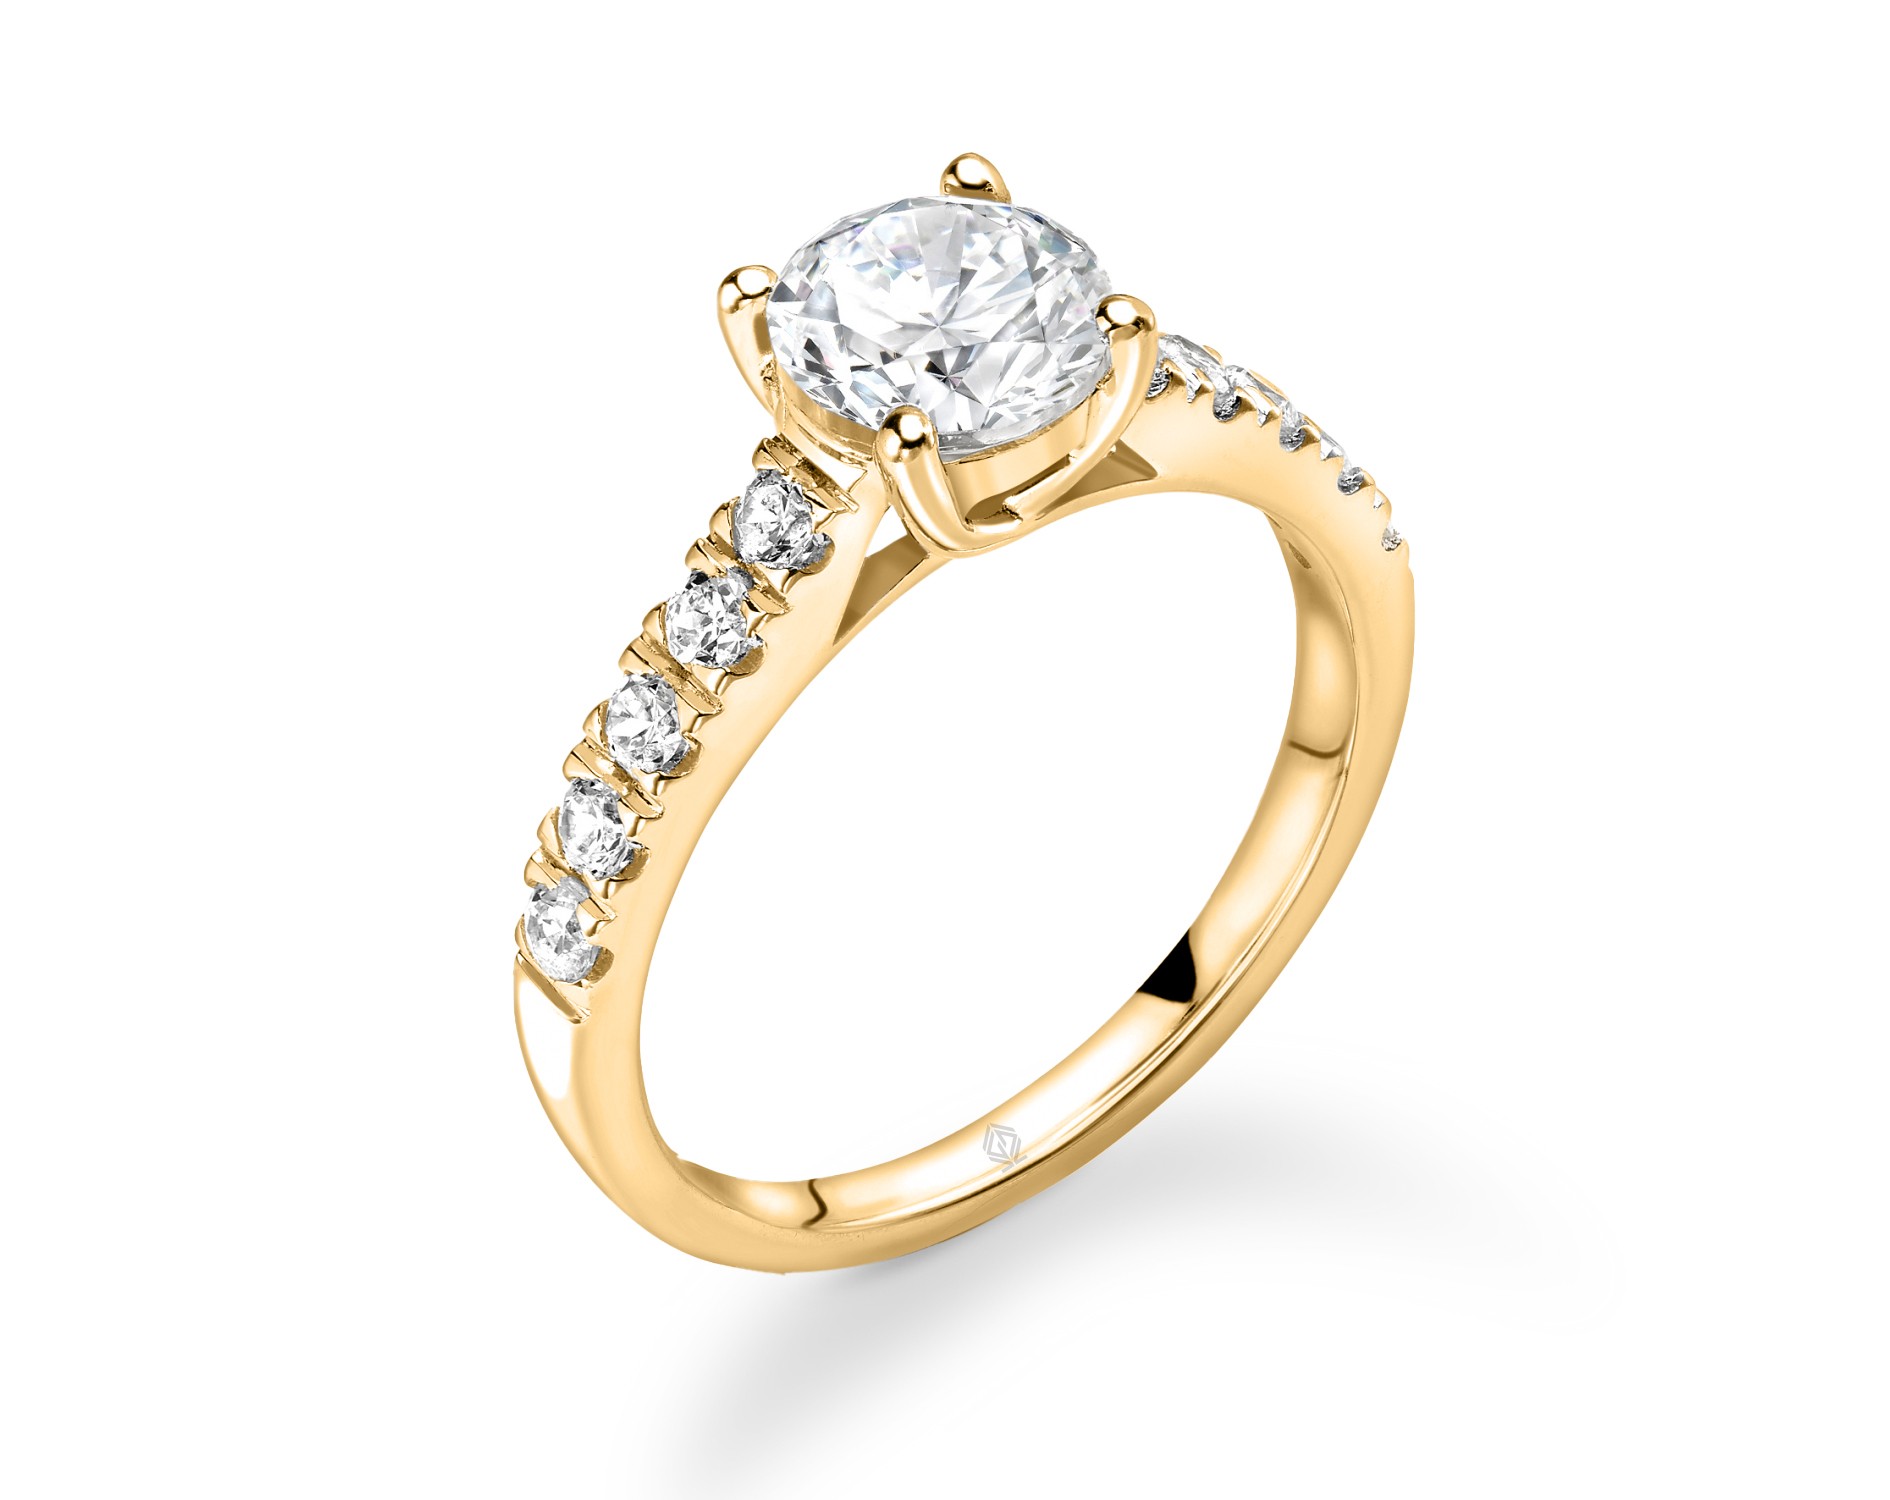 18K YELLOW GOLD ROUND CUT 4 PRONGS DIAMOND ENGAGEMENT RING WITH SIDE STONES PAVE SET